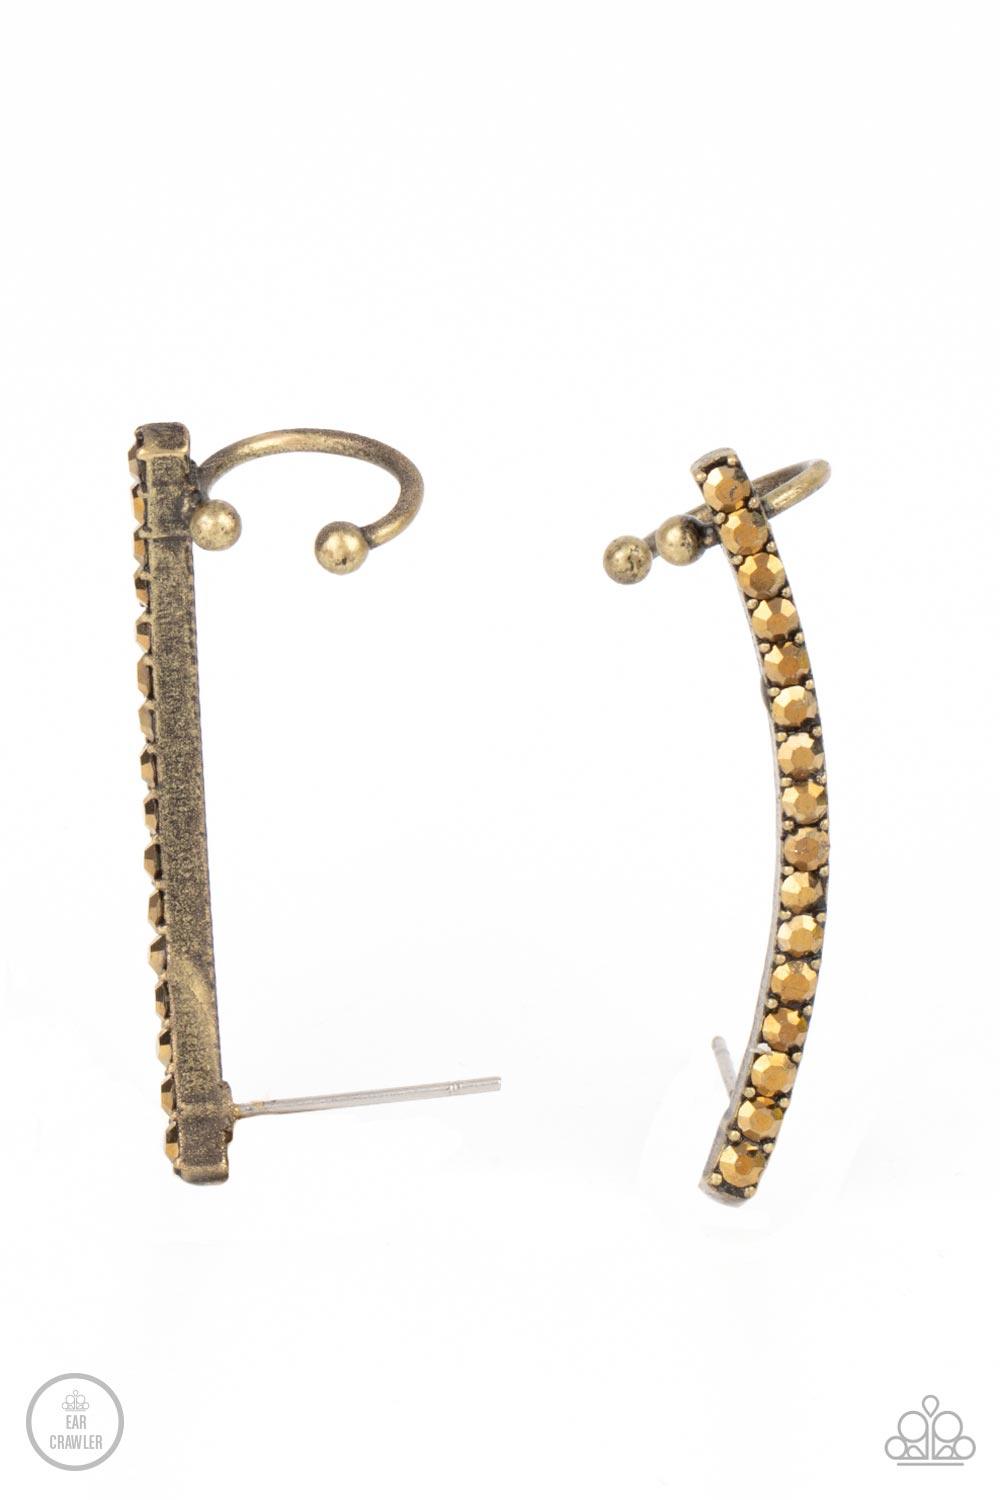 Paparazzi Accessories Give Me The SWOOP - Brass Post Earring A dainty row of glitzy aurum rhinestones is encrusted along a gritty brass bar that swoops up the ear for a smoldering style. Features a dainty cuff attached to the top for a secure fit. Sold as